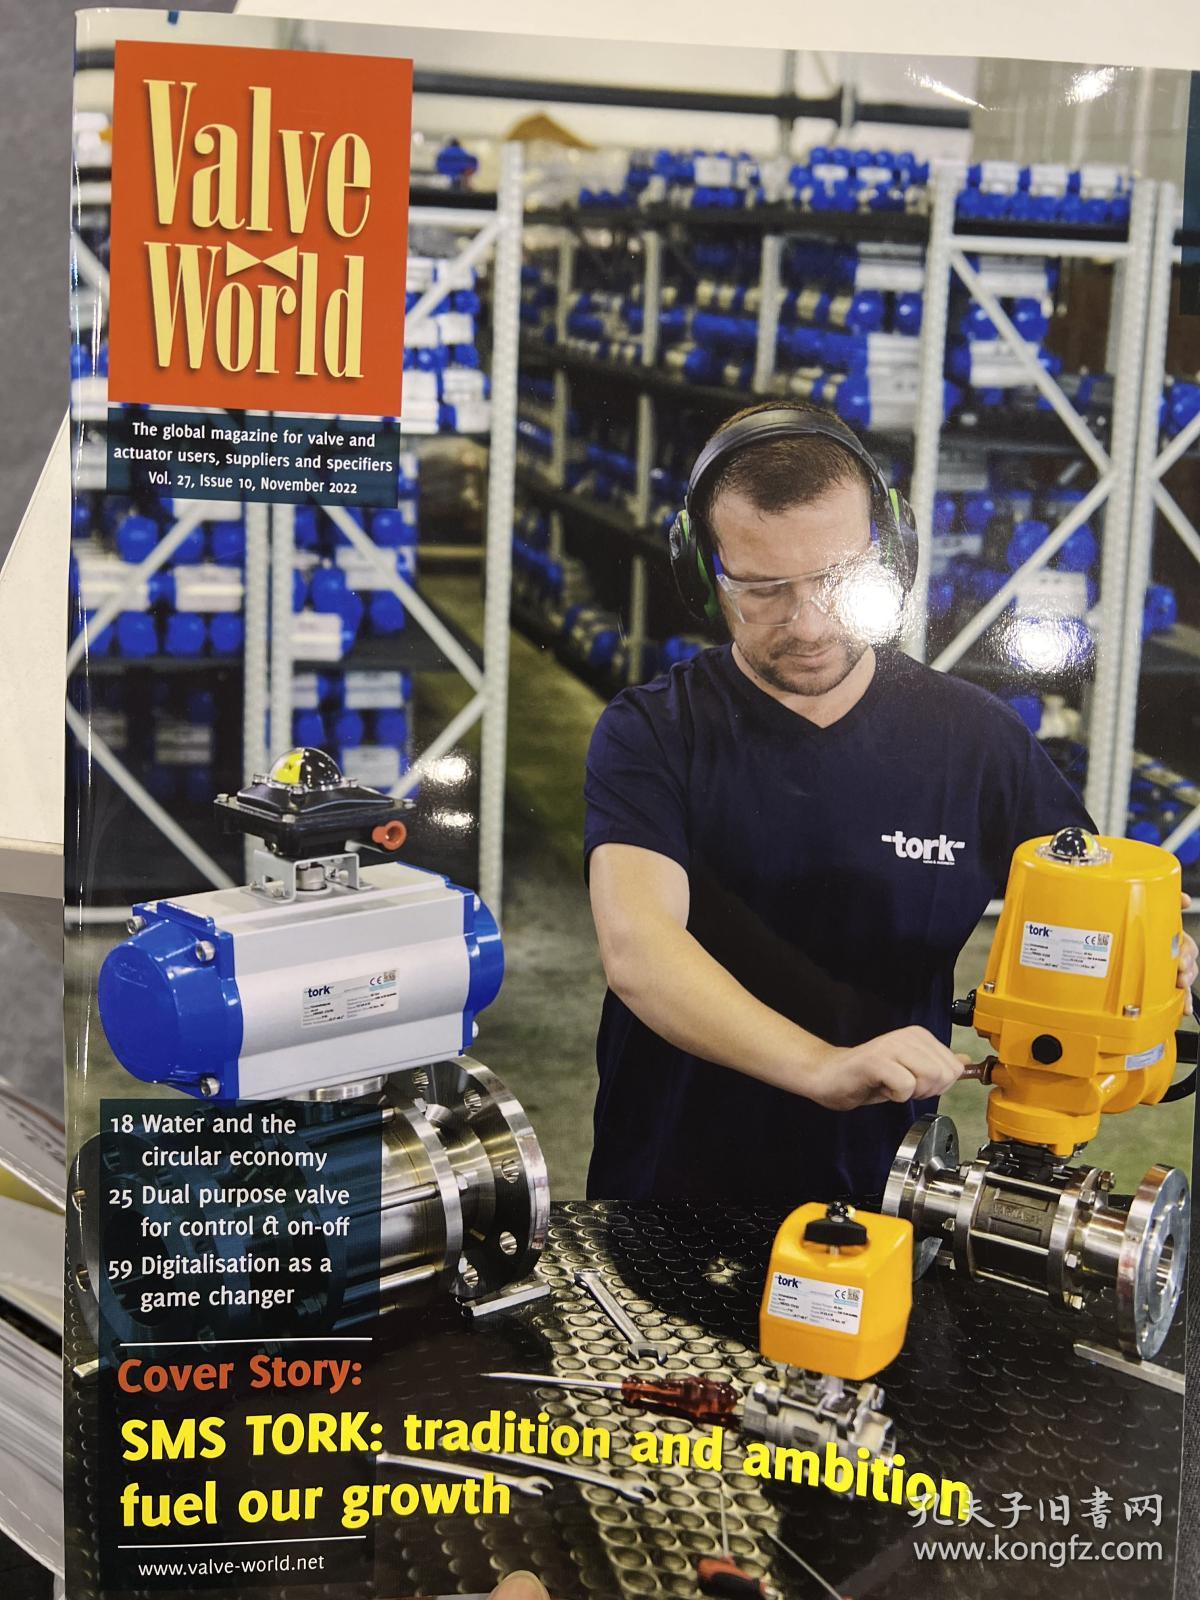 Valve World 阀门世界 英文版 2022年10月版 Vol.27，Issue 10，November 2022 Water&Wastewater SMS TORK：tradition and ambition fuel our growth water and circular economy Dual purpose valve for control & on-off 106页